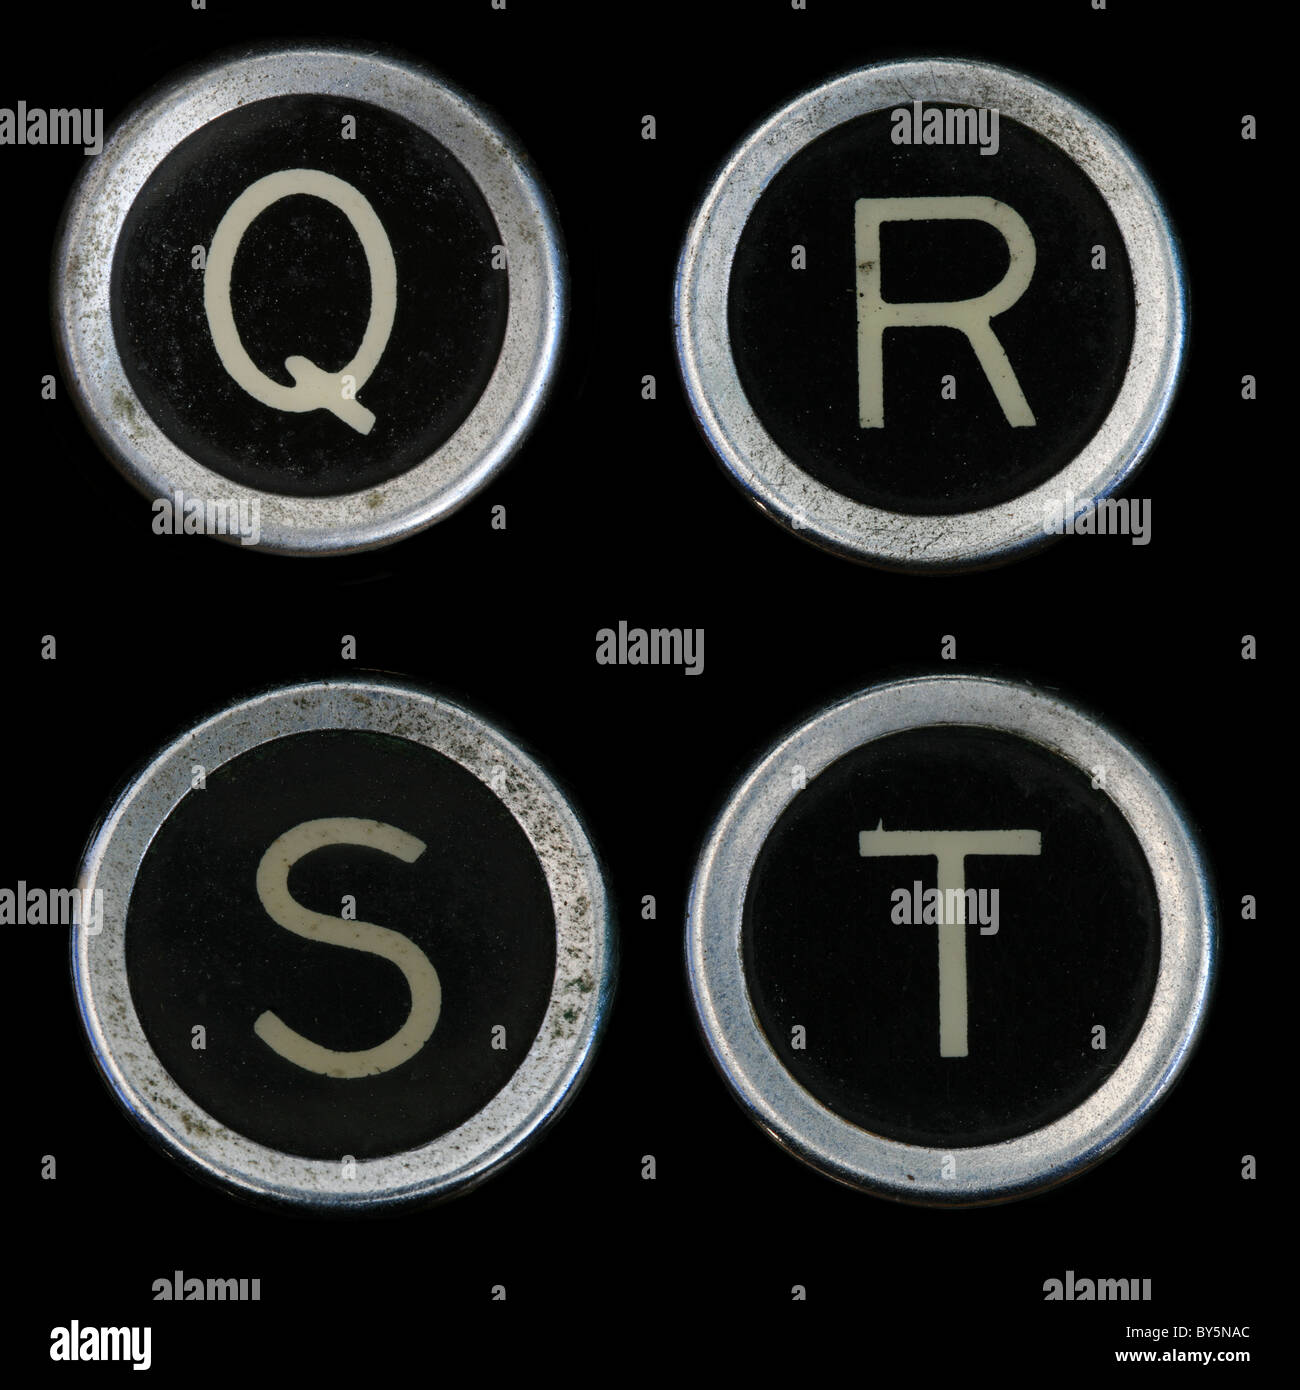 Q R S T keys from old typewriter on black background Stock Photo